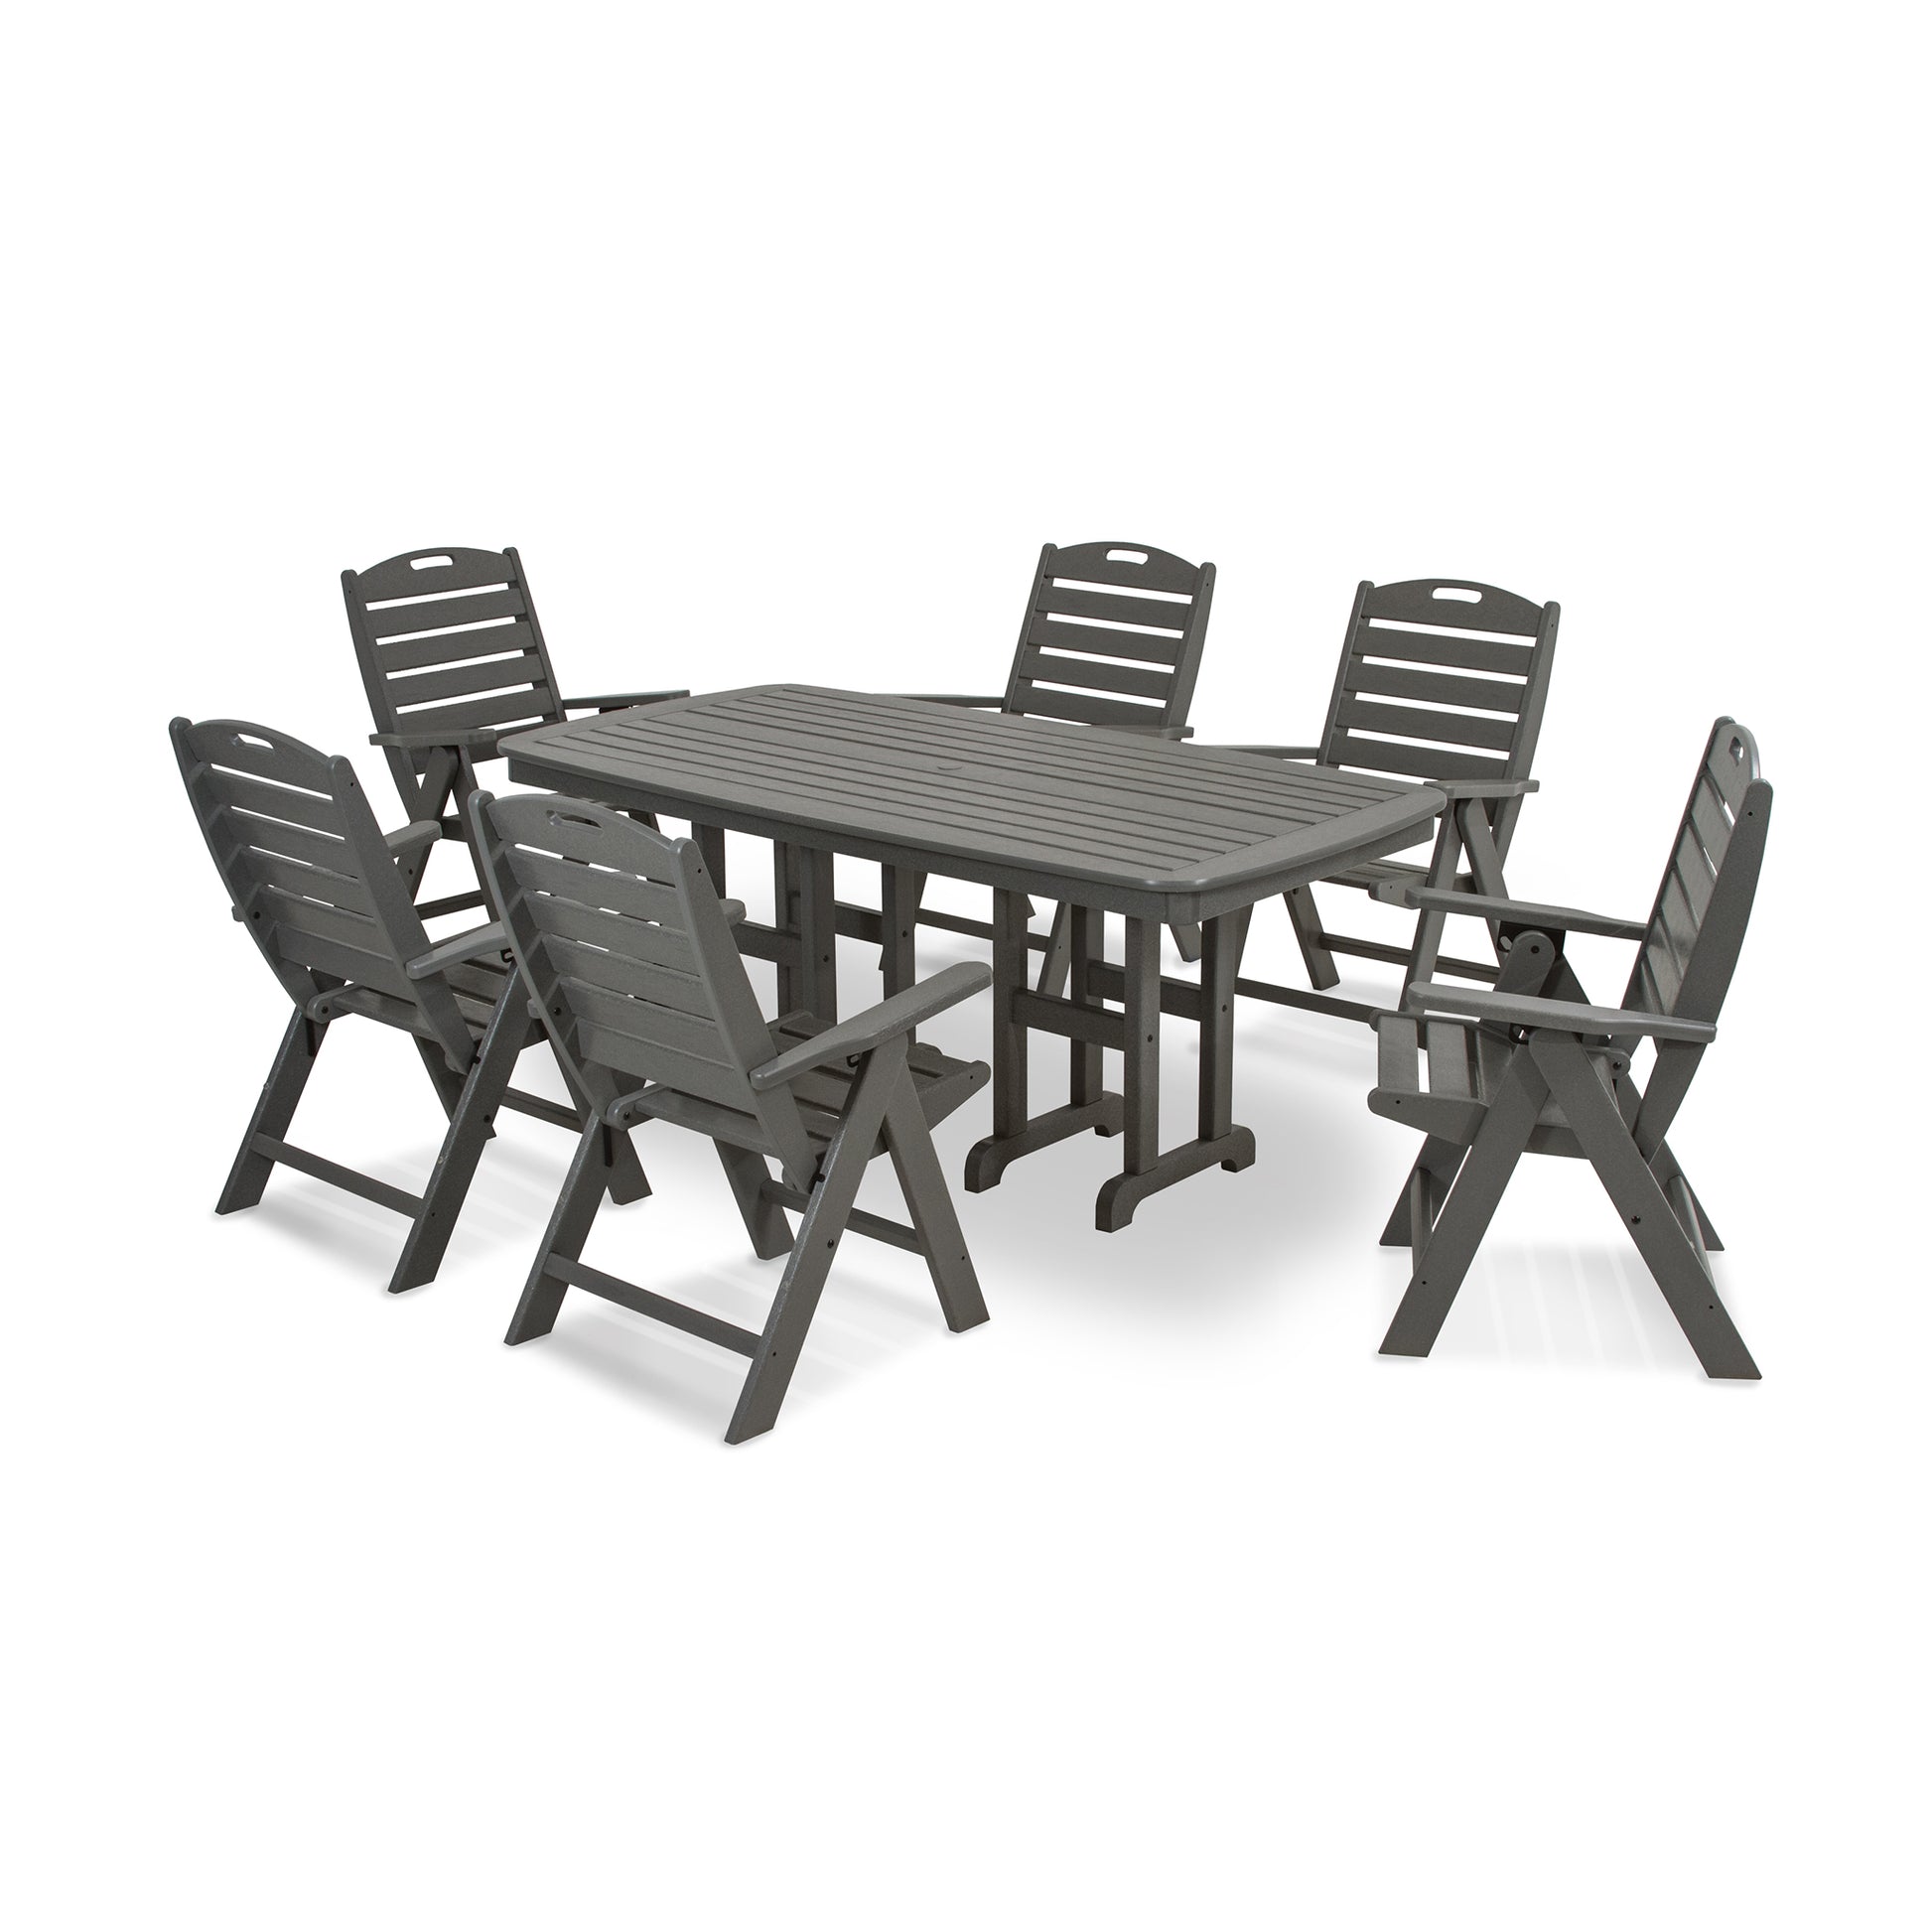 A gray POLYWOOD Nautical 7-Piece Dining Set consisting of a rectangular table and six chairs, positioned on a white background. The furniture displays a clean and modern design.